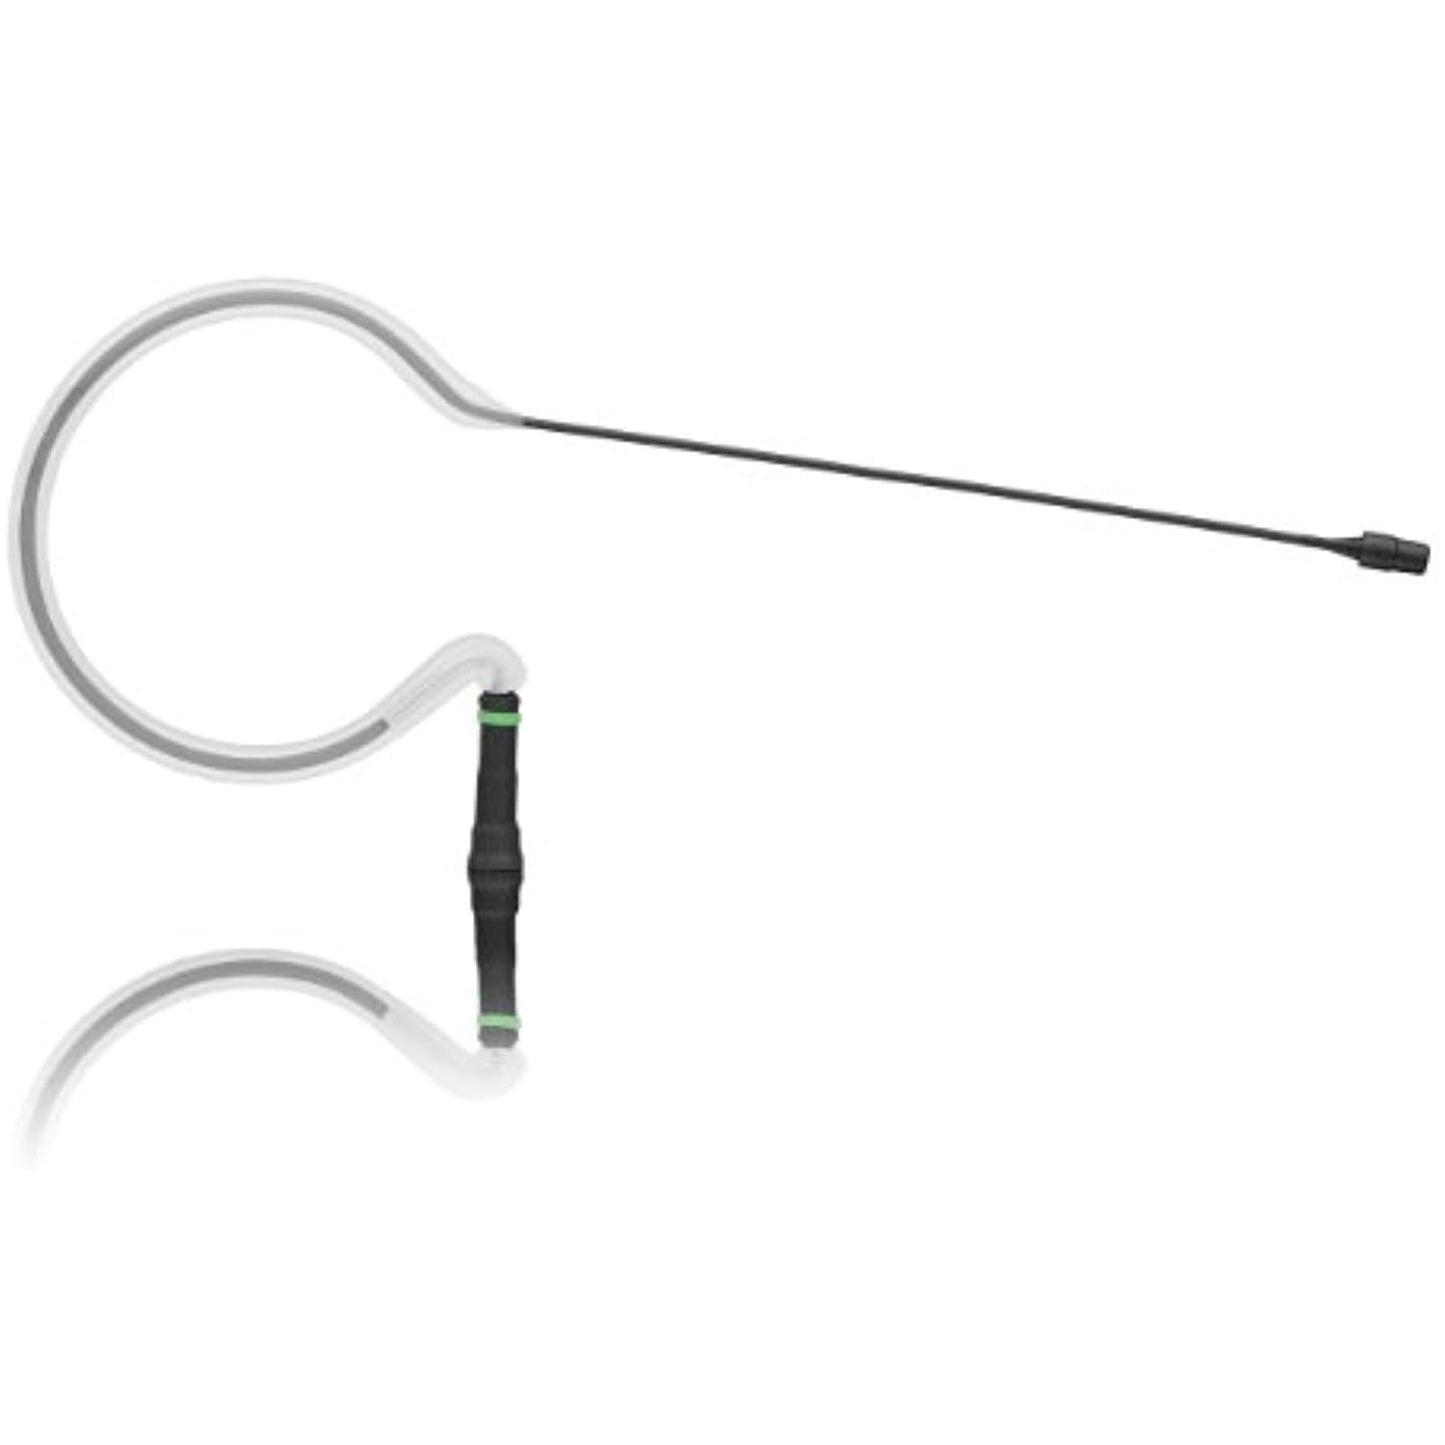 Countryman E6IDW6B2SR Soft E6i Directional Earset with 2 mm Cable for Sennheiser Transmitters (Black)